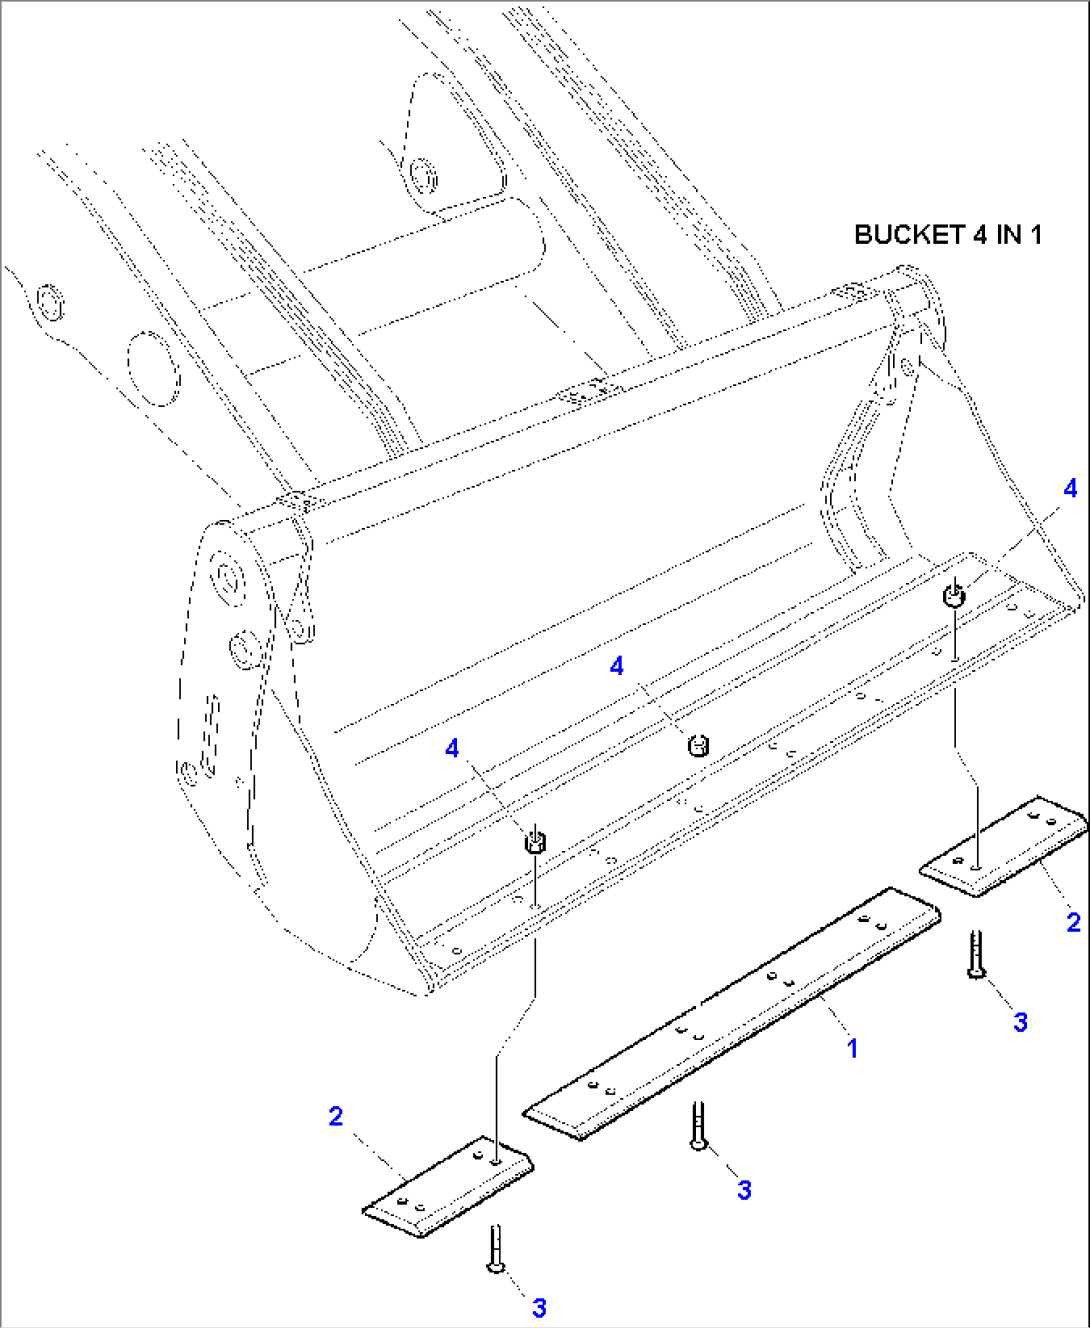 BLADE FOR BUCKET 4 IN 1 (OPTIONAL)